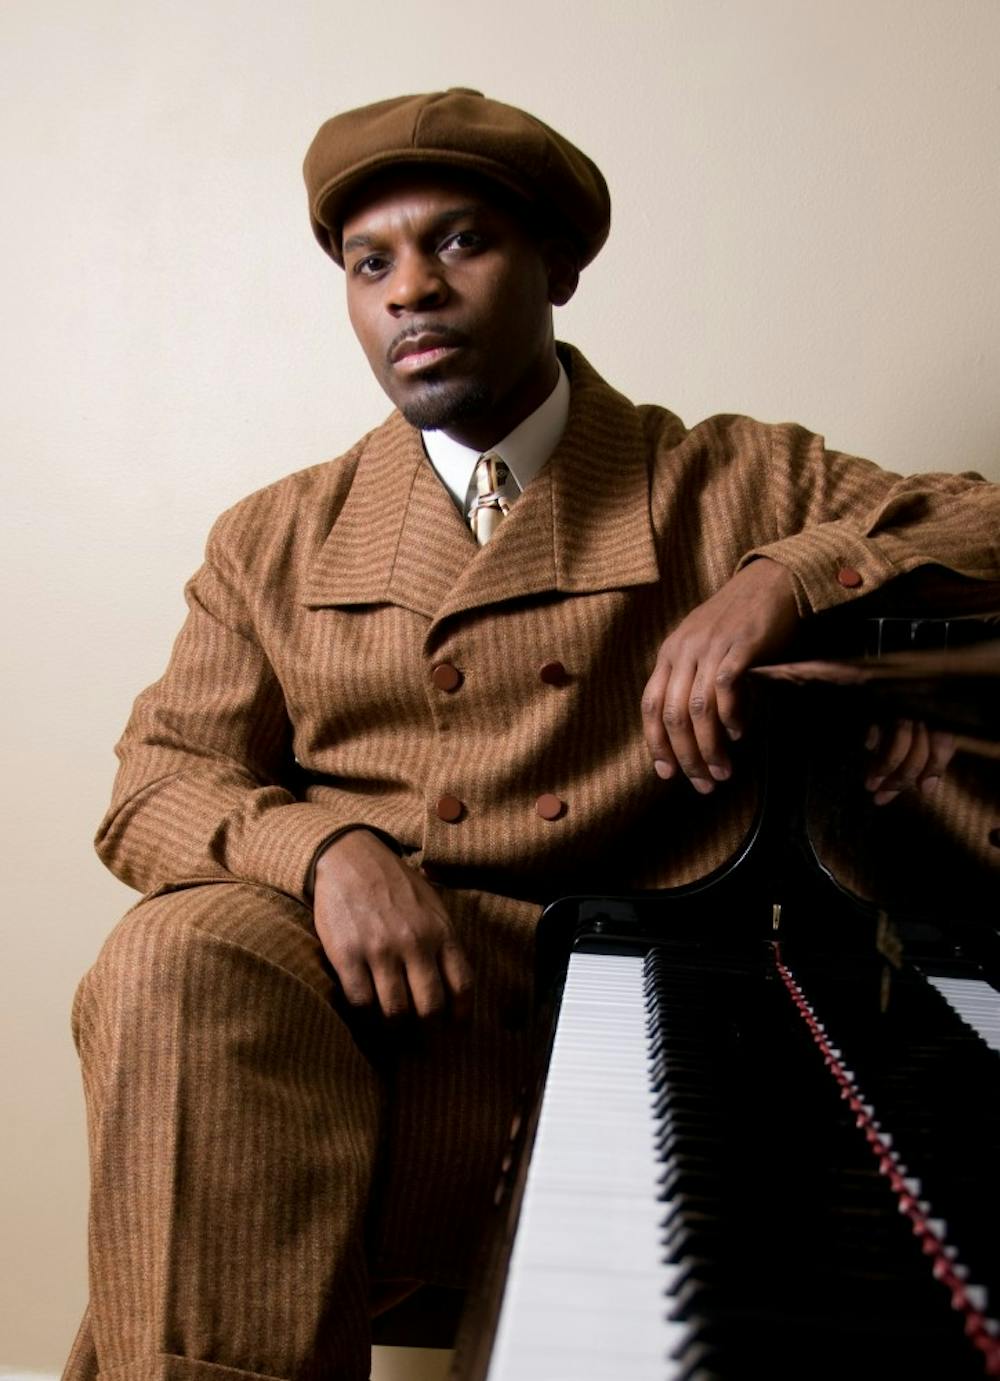 Reginald R. Robinson to perform 'Cultural Harmonies' a ragtime orchestration 